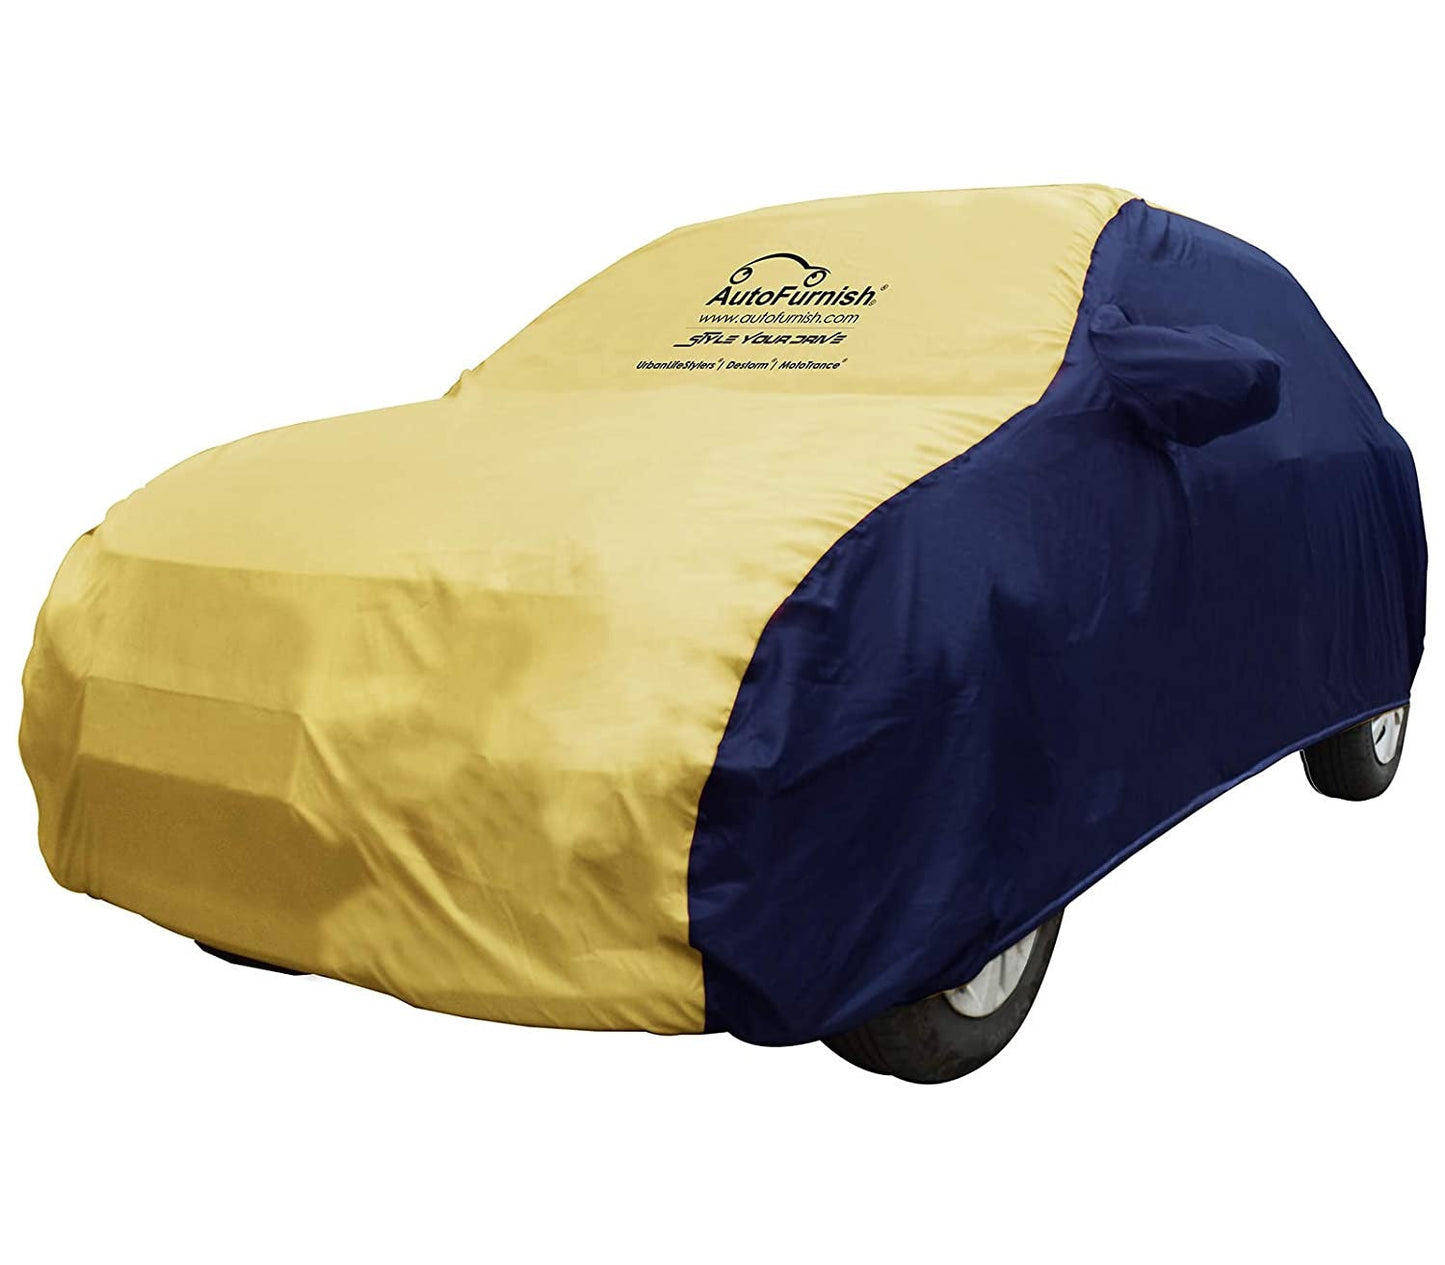 MG ZS EV (2020) Car Body Cover, Triple Stitched, Heat & Water Resistant with Side Mirror Pockets (SPORTY Series)